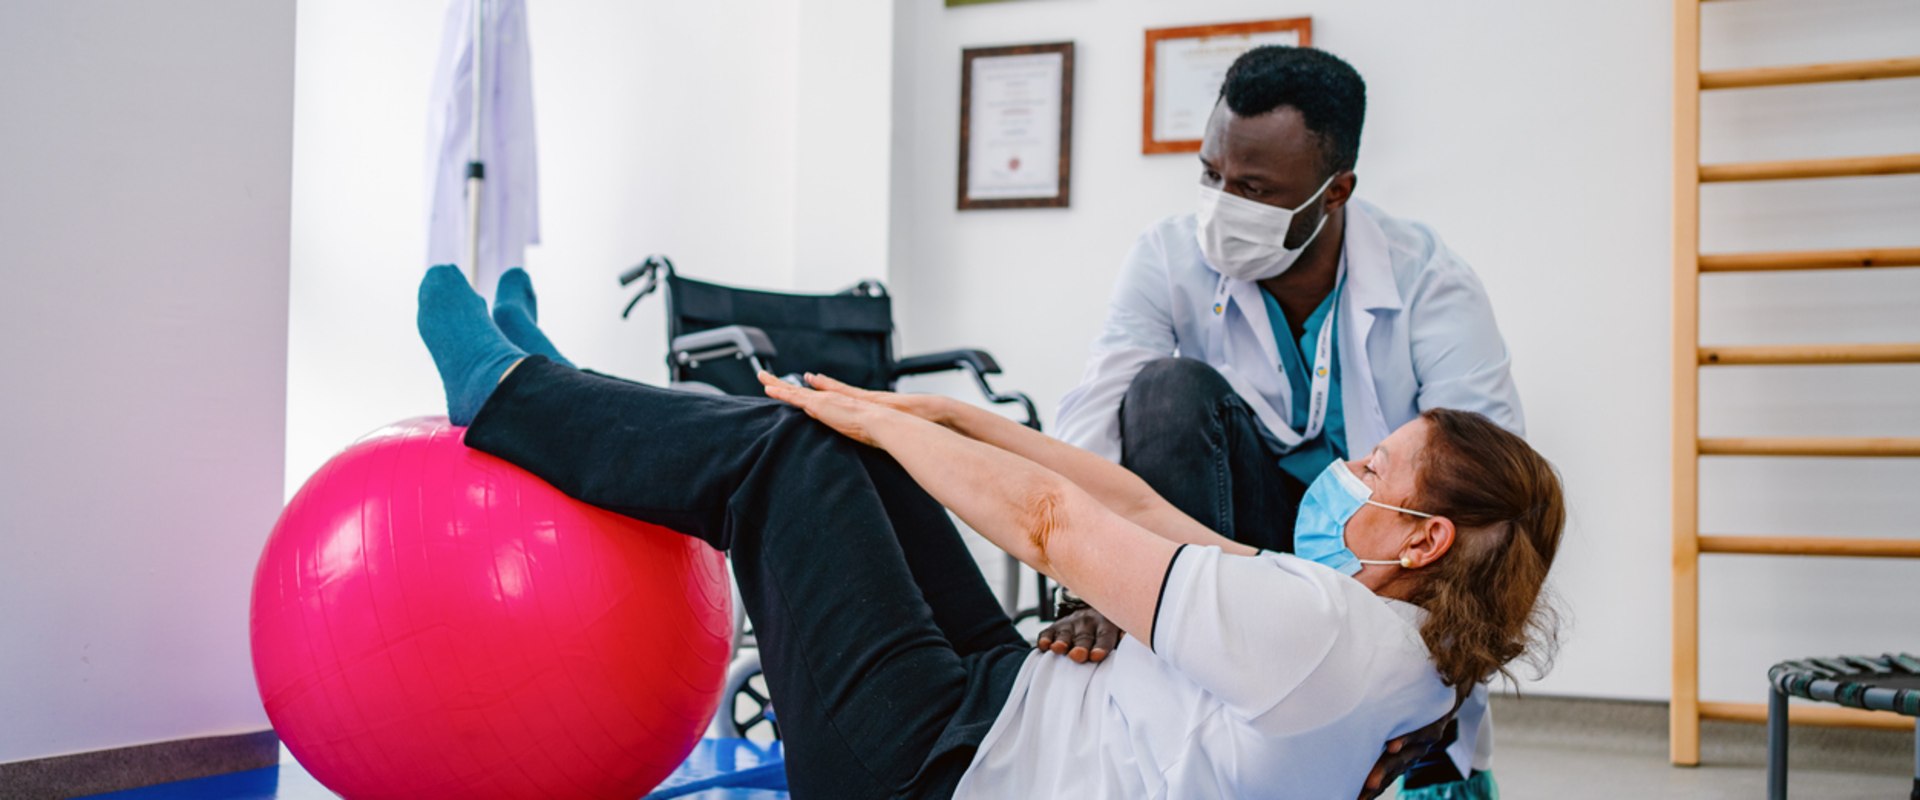 What Not to Do in Physical Therapy: An Expert's Guide